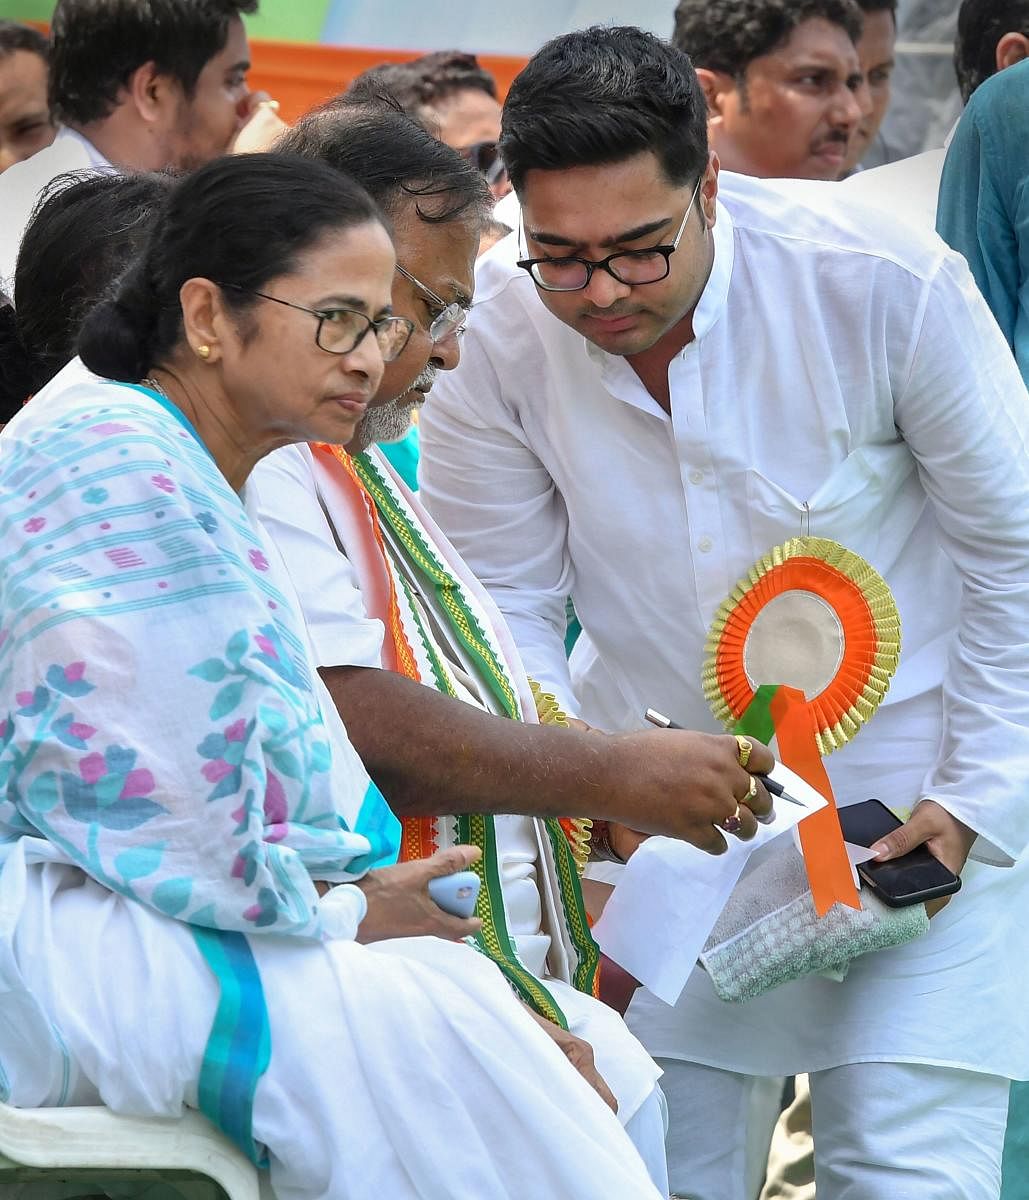 (From left) West Bengal Chief Minister Mamata Banerjee, Education Minister Partha Chatterjee and MP Abhishek Banerjee during Trinamool Chhatra Parishad Foundation Day rally, in Kolkata on Wednesday. PTI